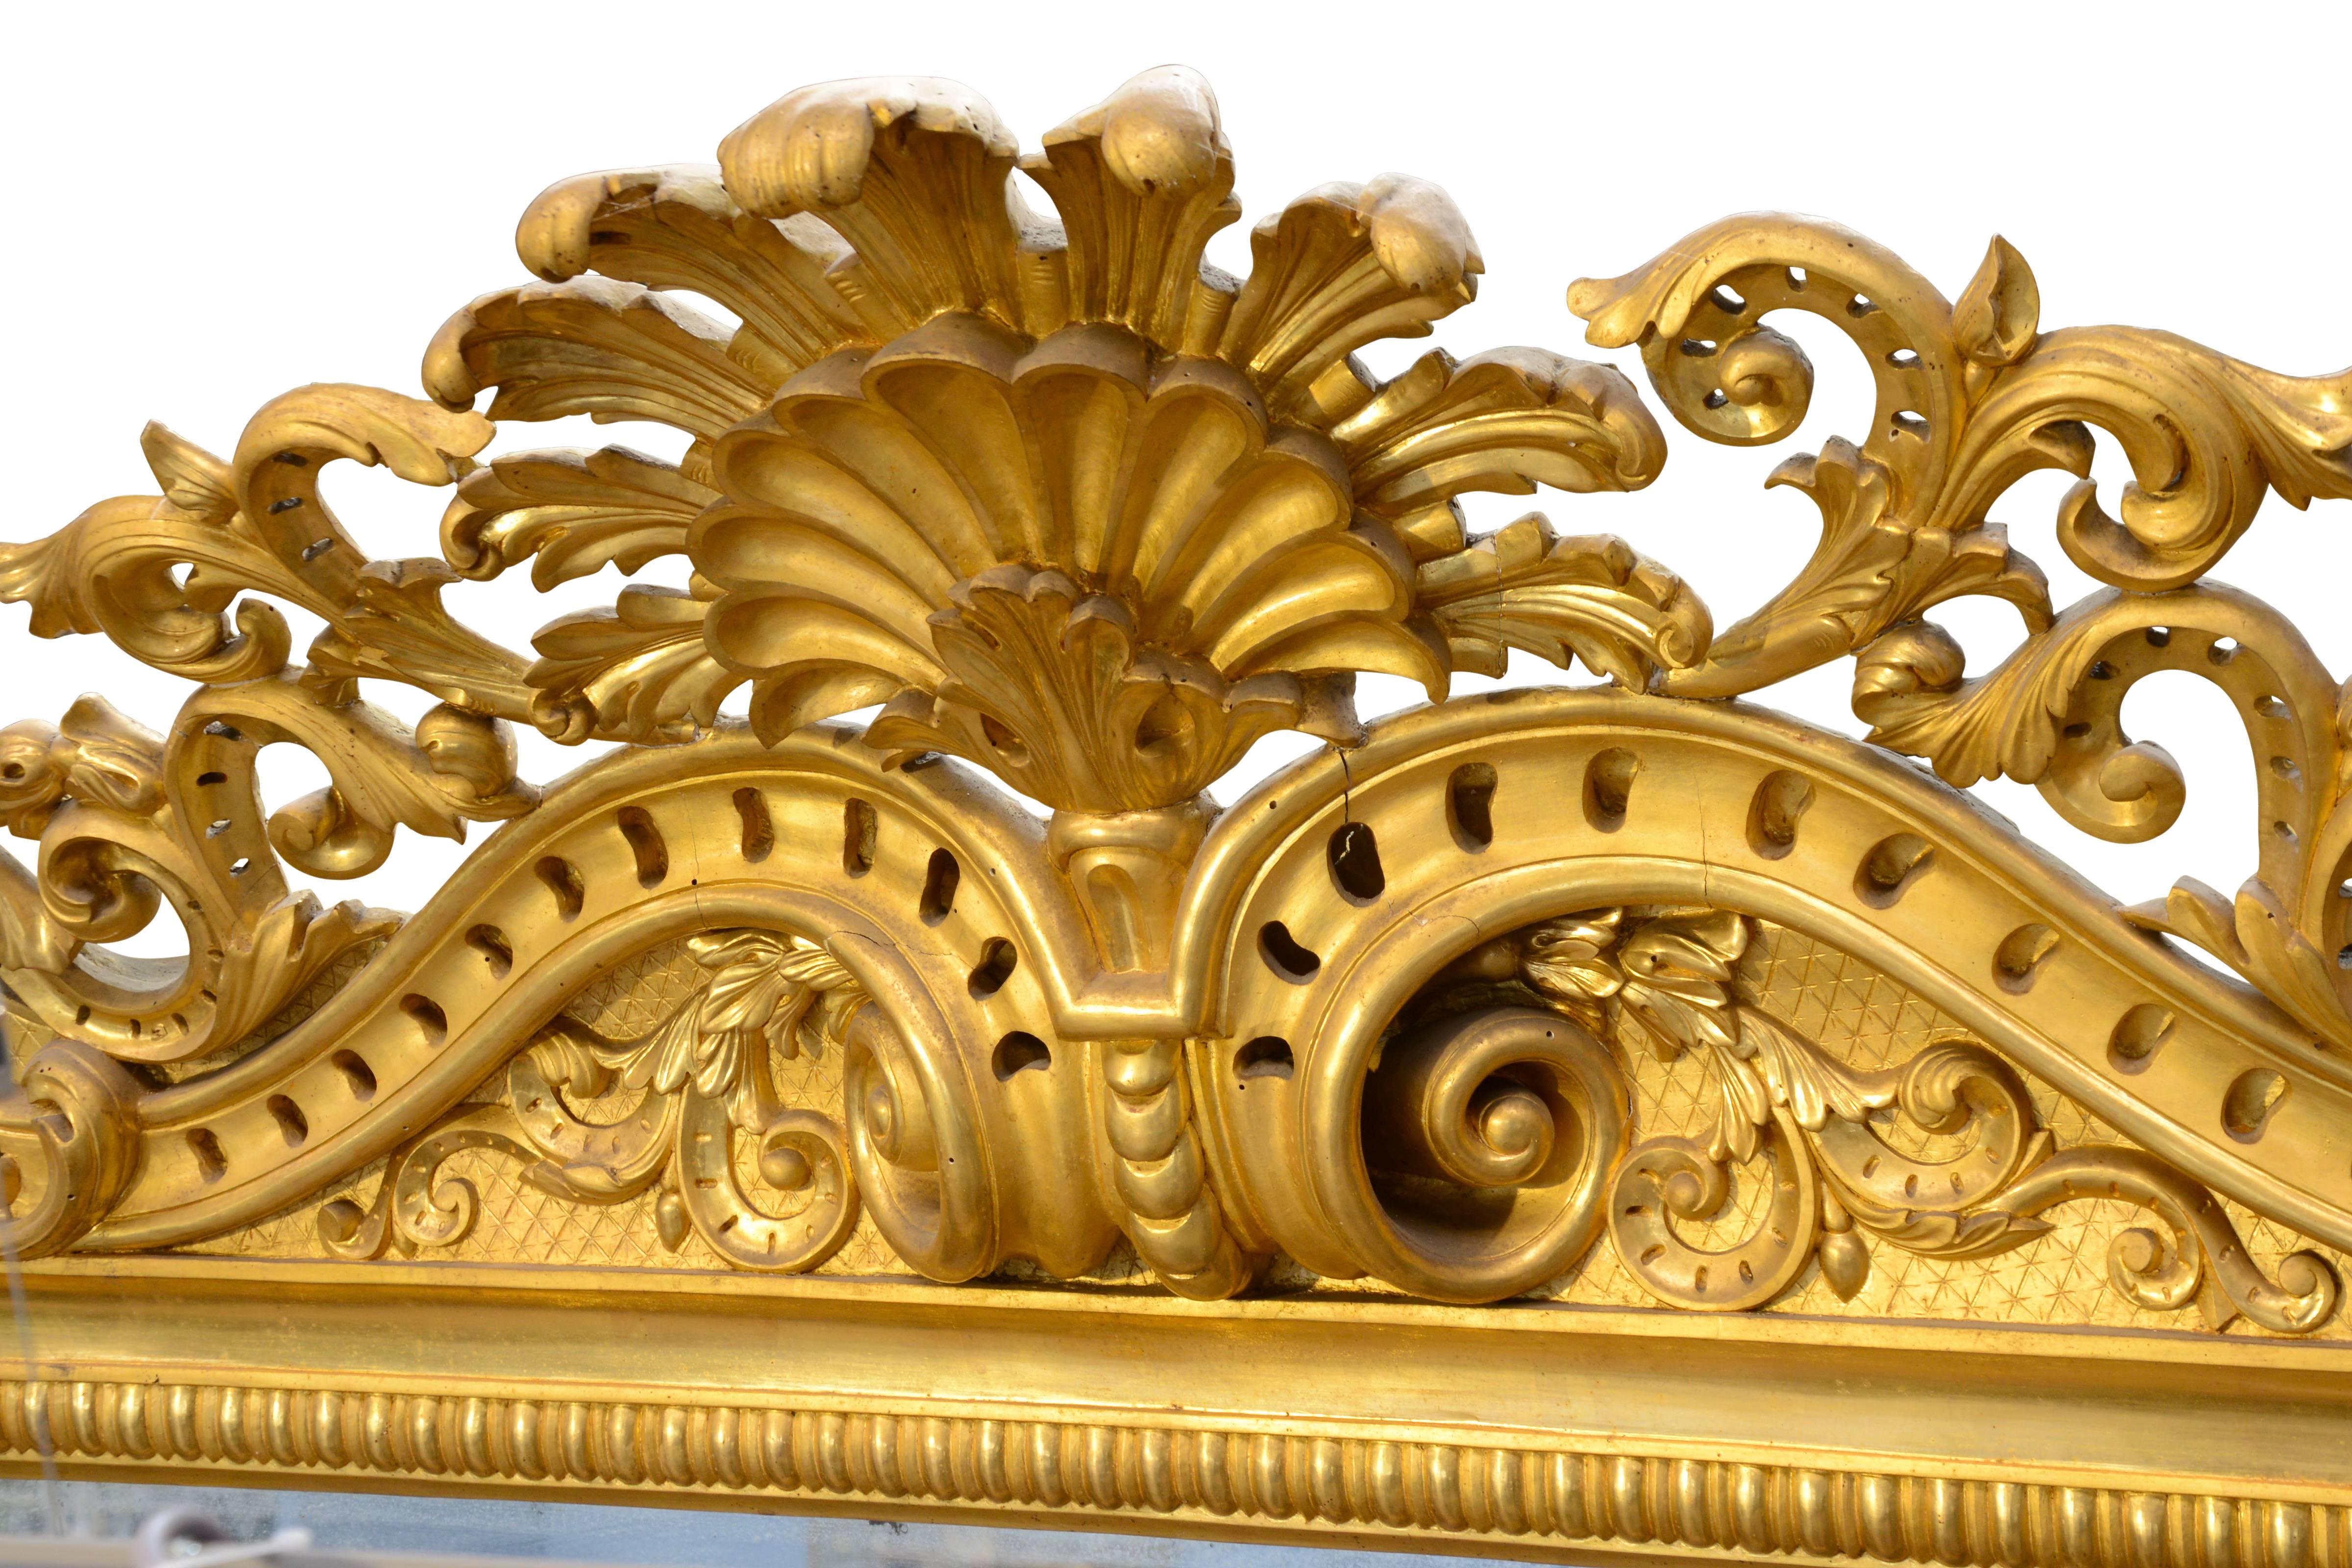 Dated from the early 19th century, imposing Italian Baroque style mirror in carved and gilded wood. Bordered by a frieze of ovals, large volutes and shells adorned with foliage and acanthus leaves frame the mirror. A large shell overhangs the